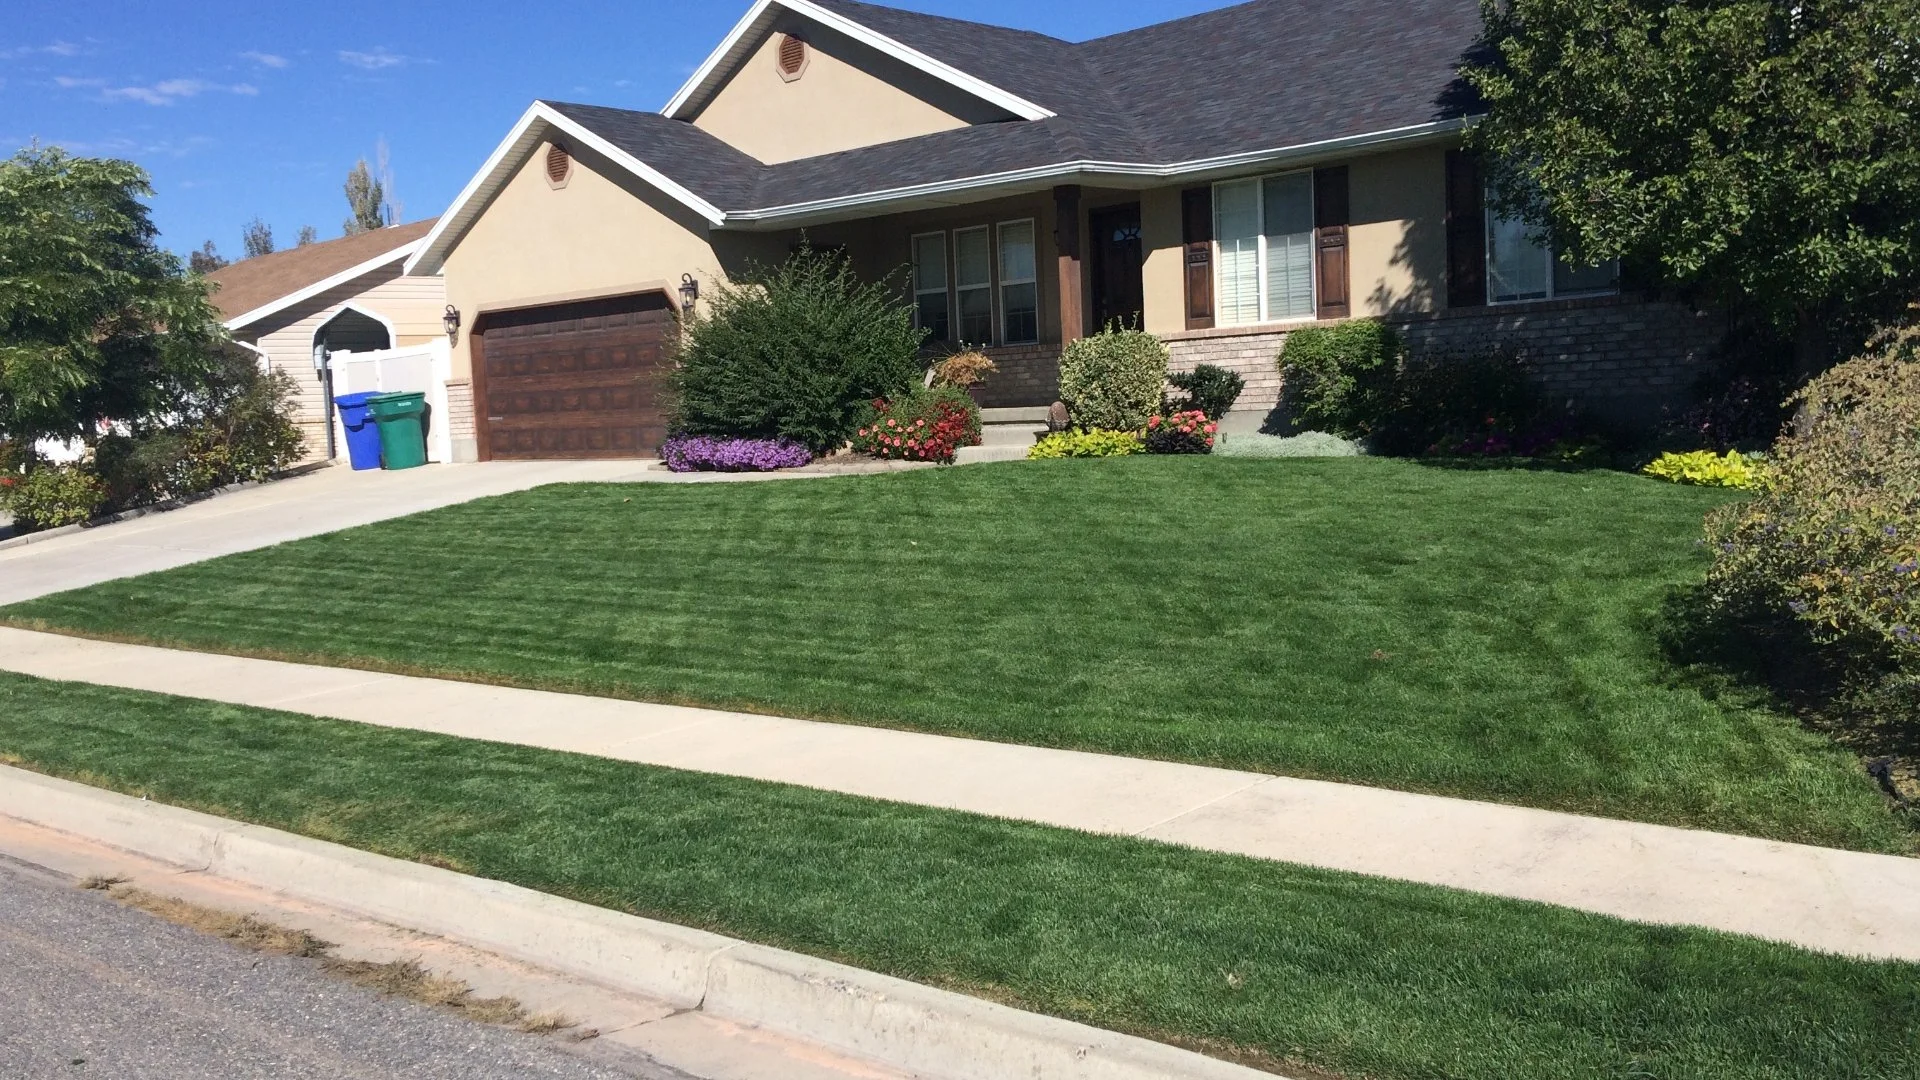 Healthy lawn in Lehi, UT from our lawn care services.